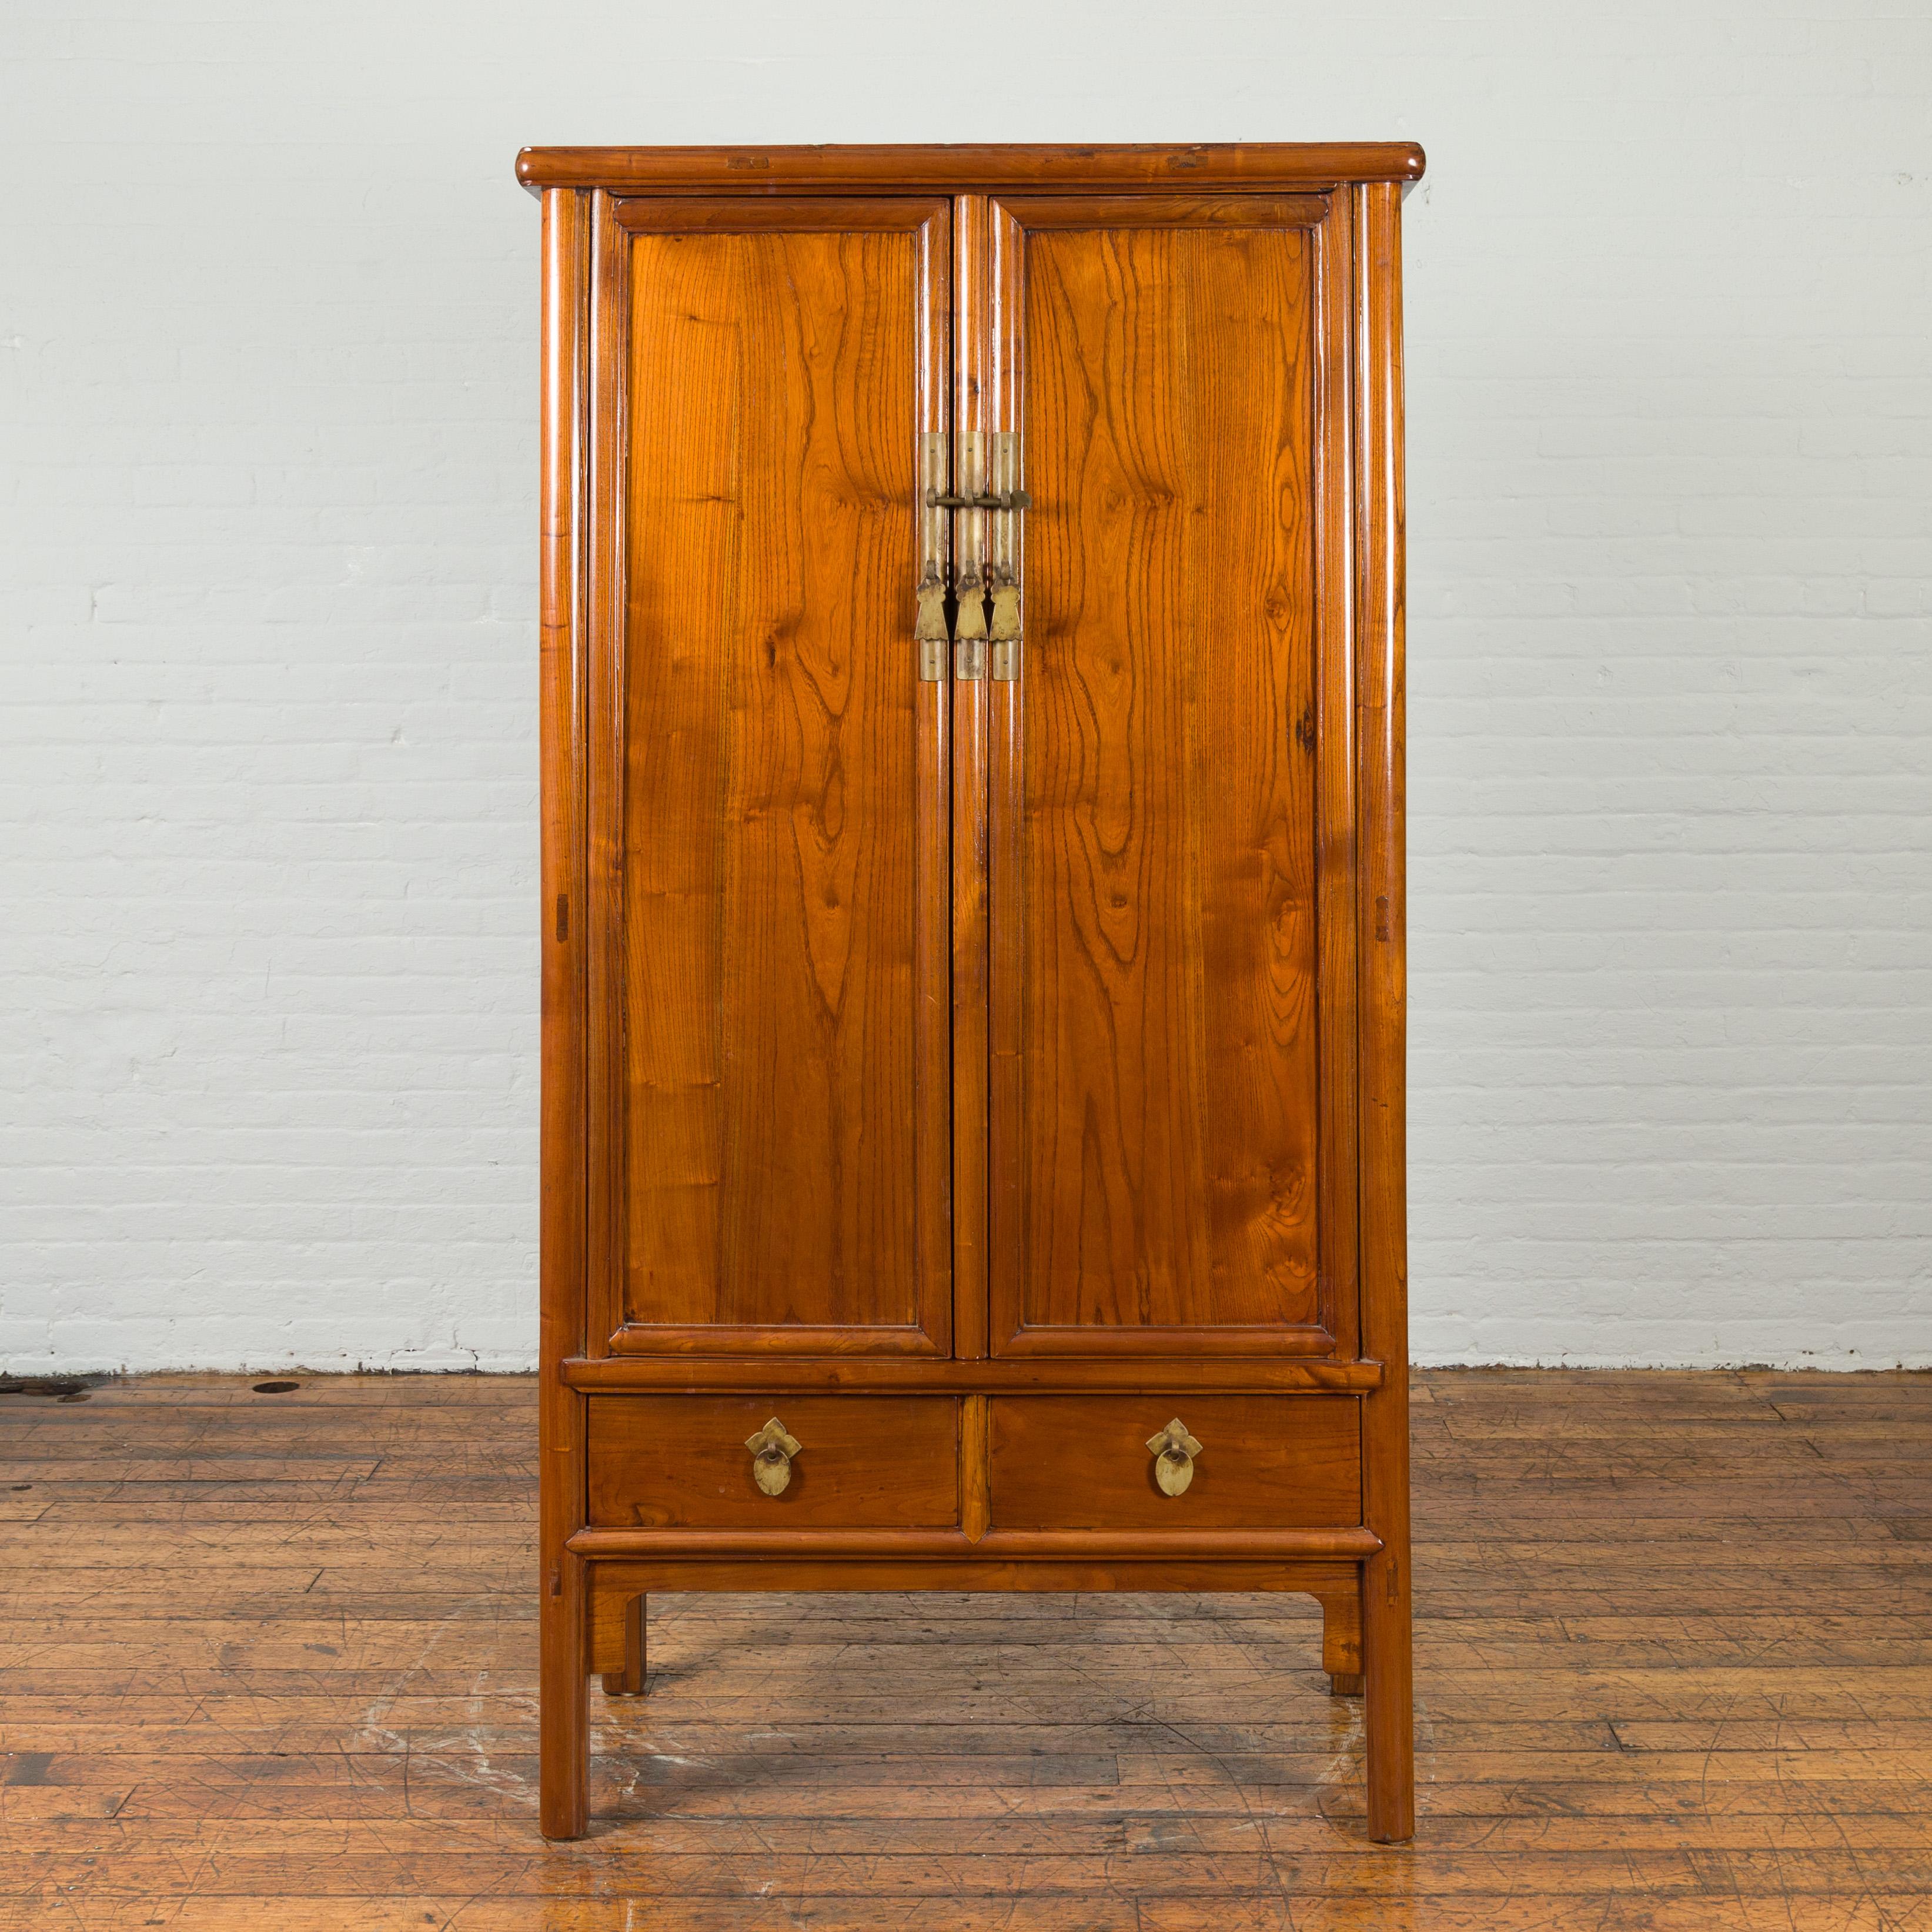 A Chinese Qing dynasty period natural elm noodle cabinet from the 19th century, with brass hardware and drawers. Created in China during the Qing dynasty, this elm cabinet features a tapering silhouette accented with brass hardware. The two doors